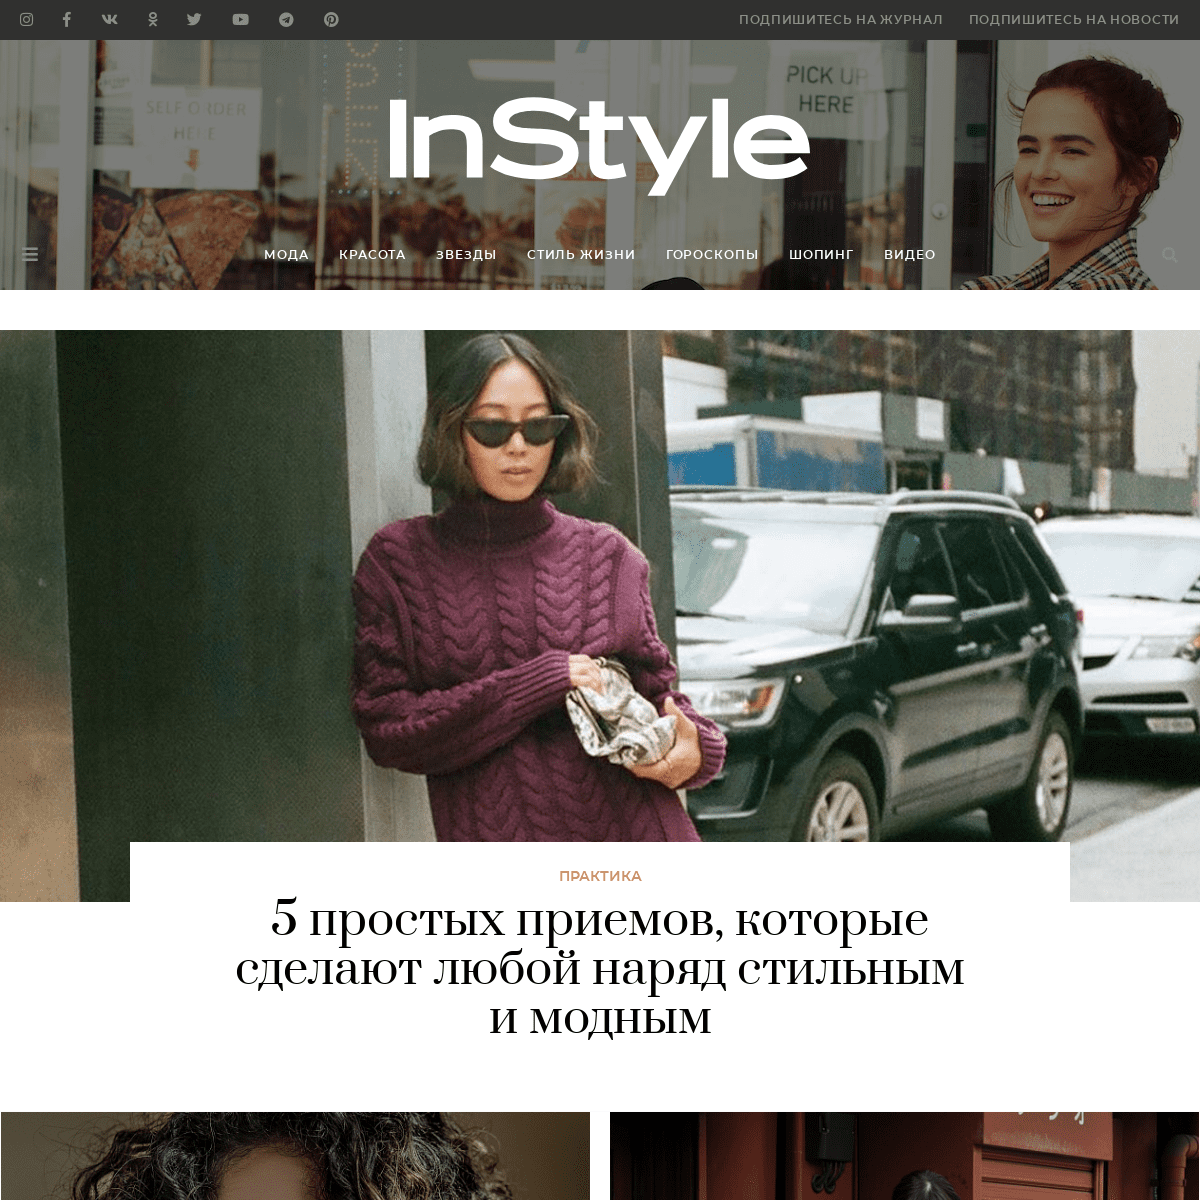 A complete backup of instyle.ru